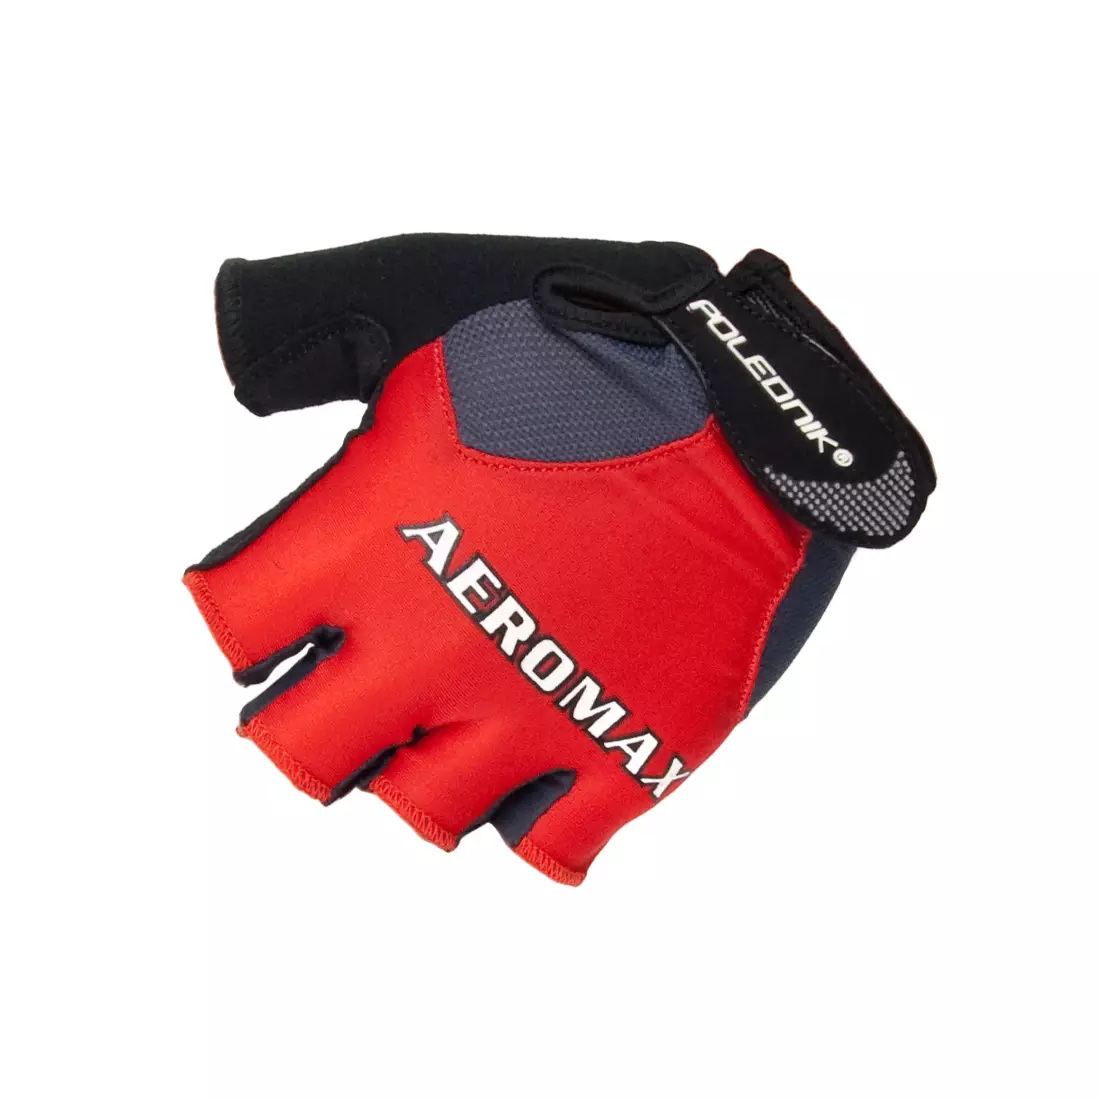 POLEDNIK AEROMAX cycling gloves, color: Red